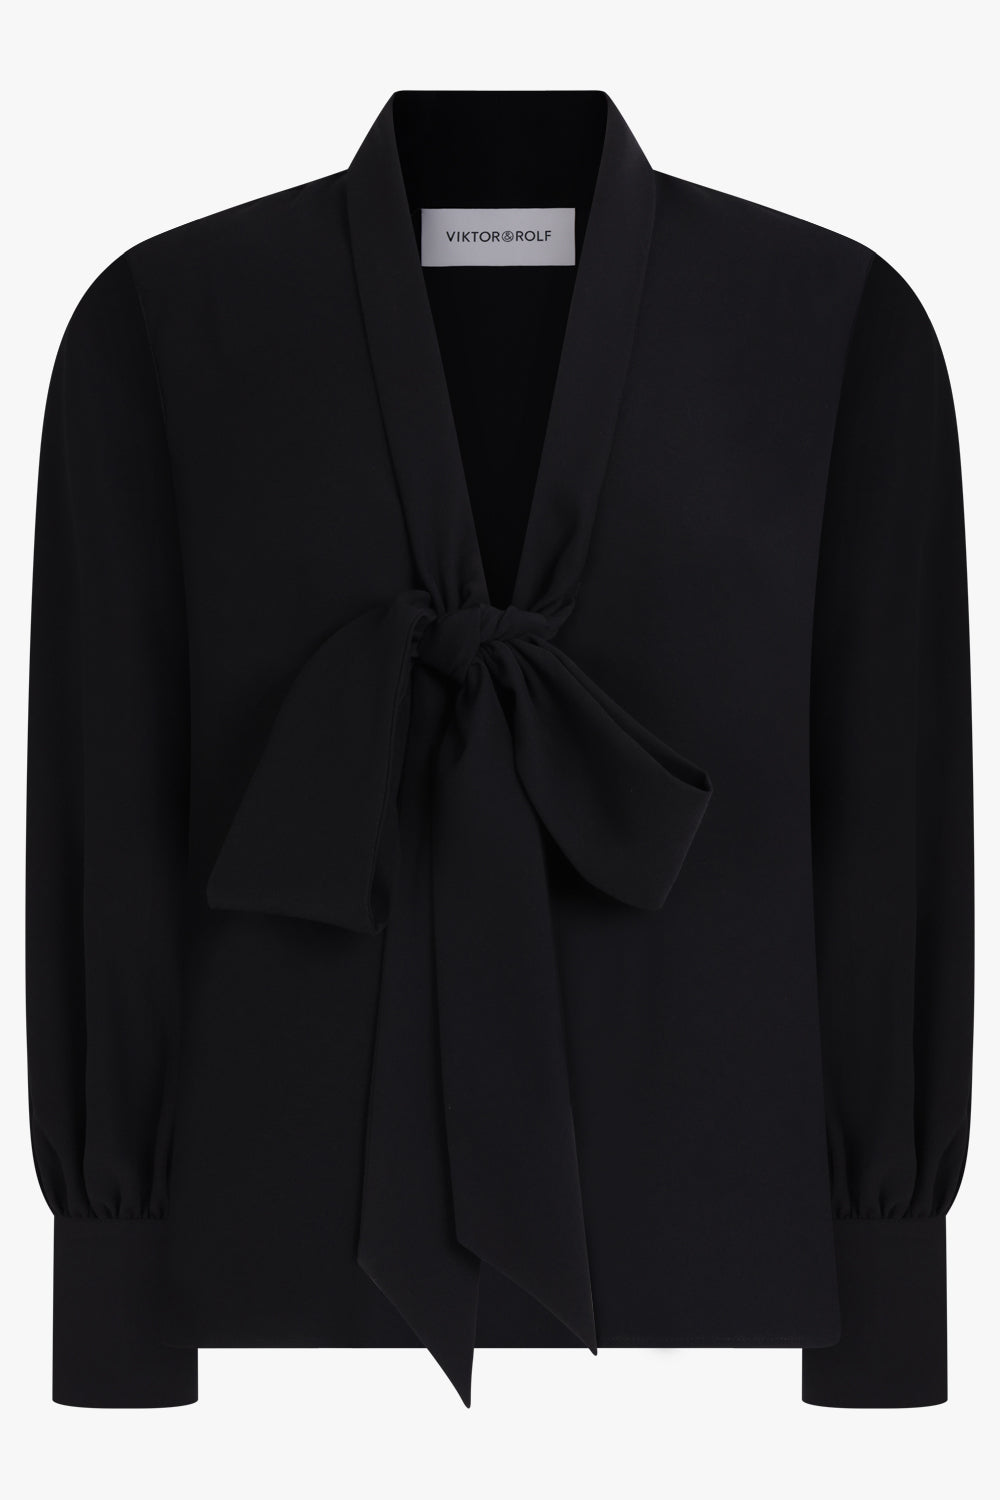 VIKTOR & ROLF RTW Low And Bow Blouse | Black